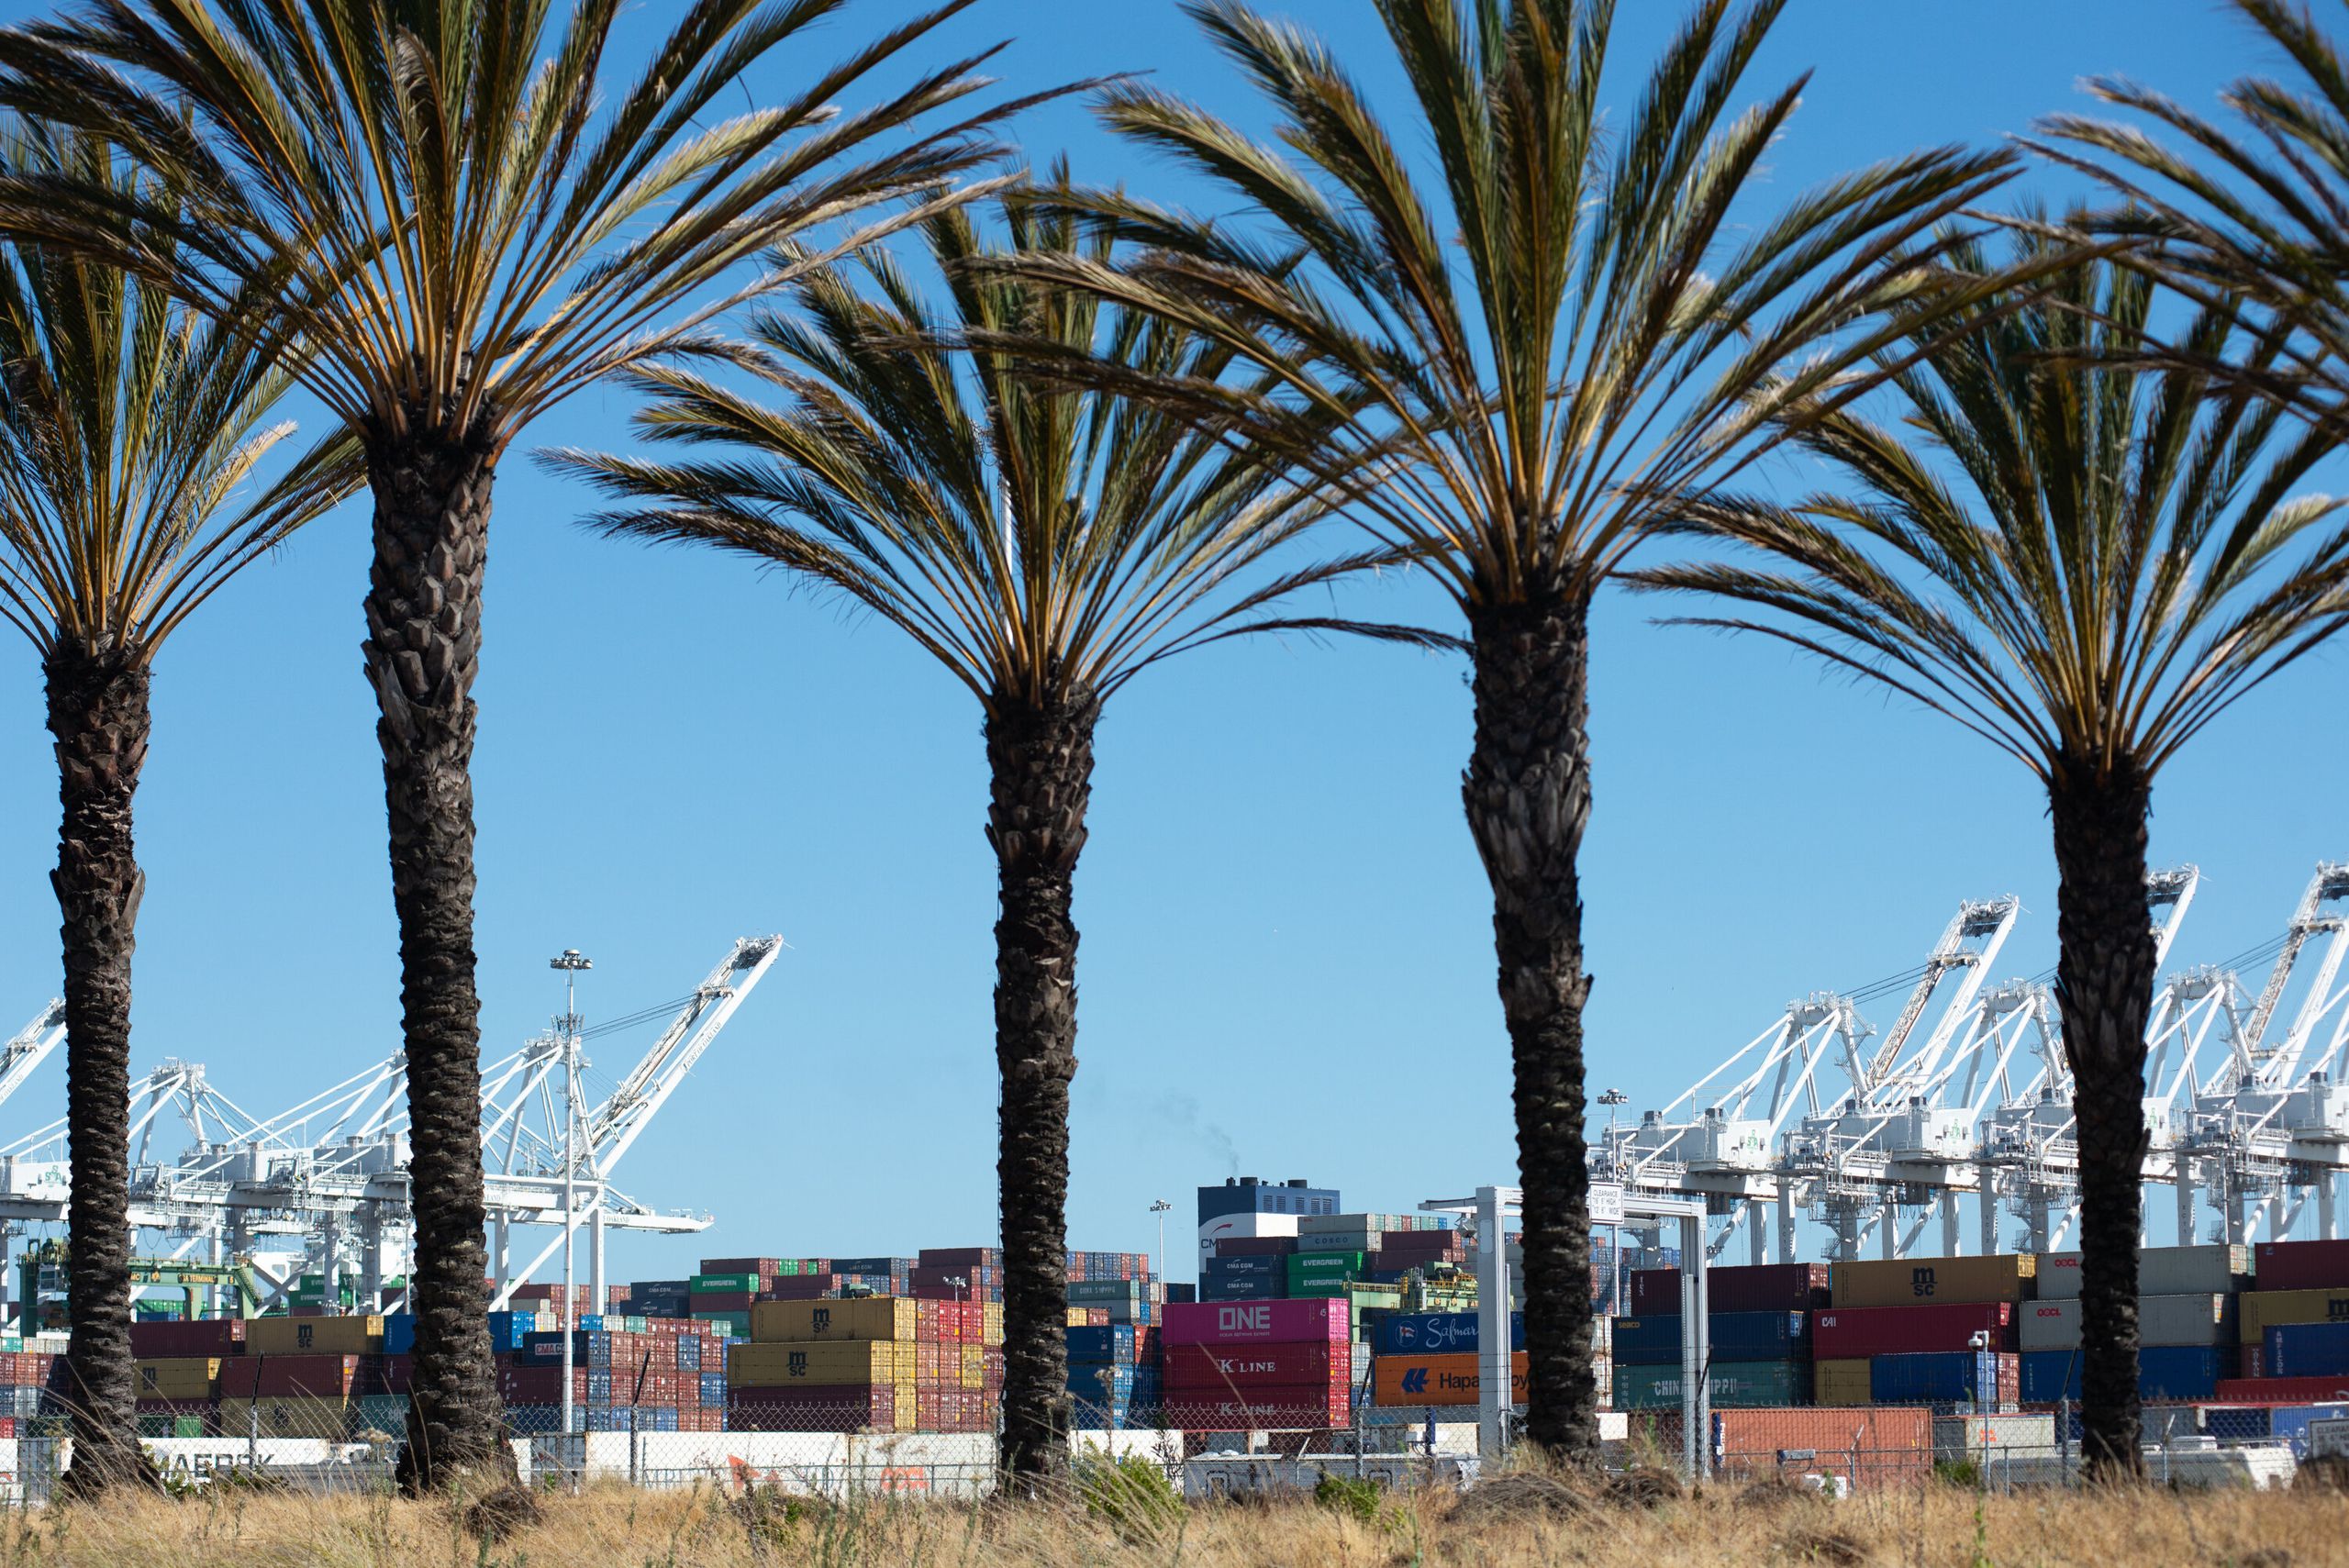 The Port of Oakland, a major container port on the West Coast, contributes to air pollution in the adjacent neighborhood of W